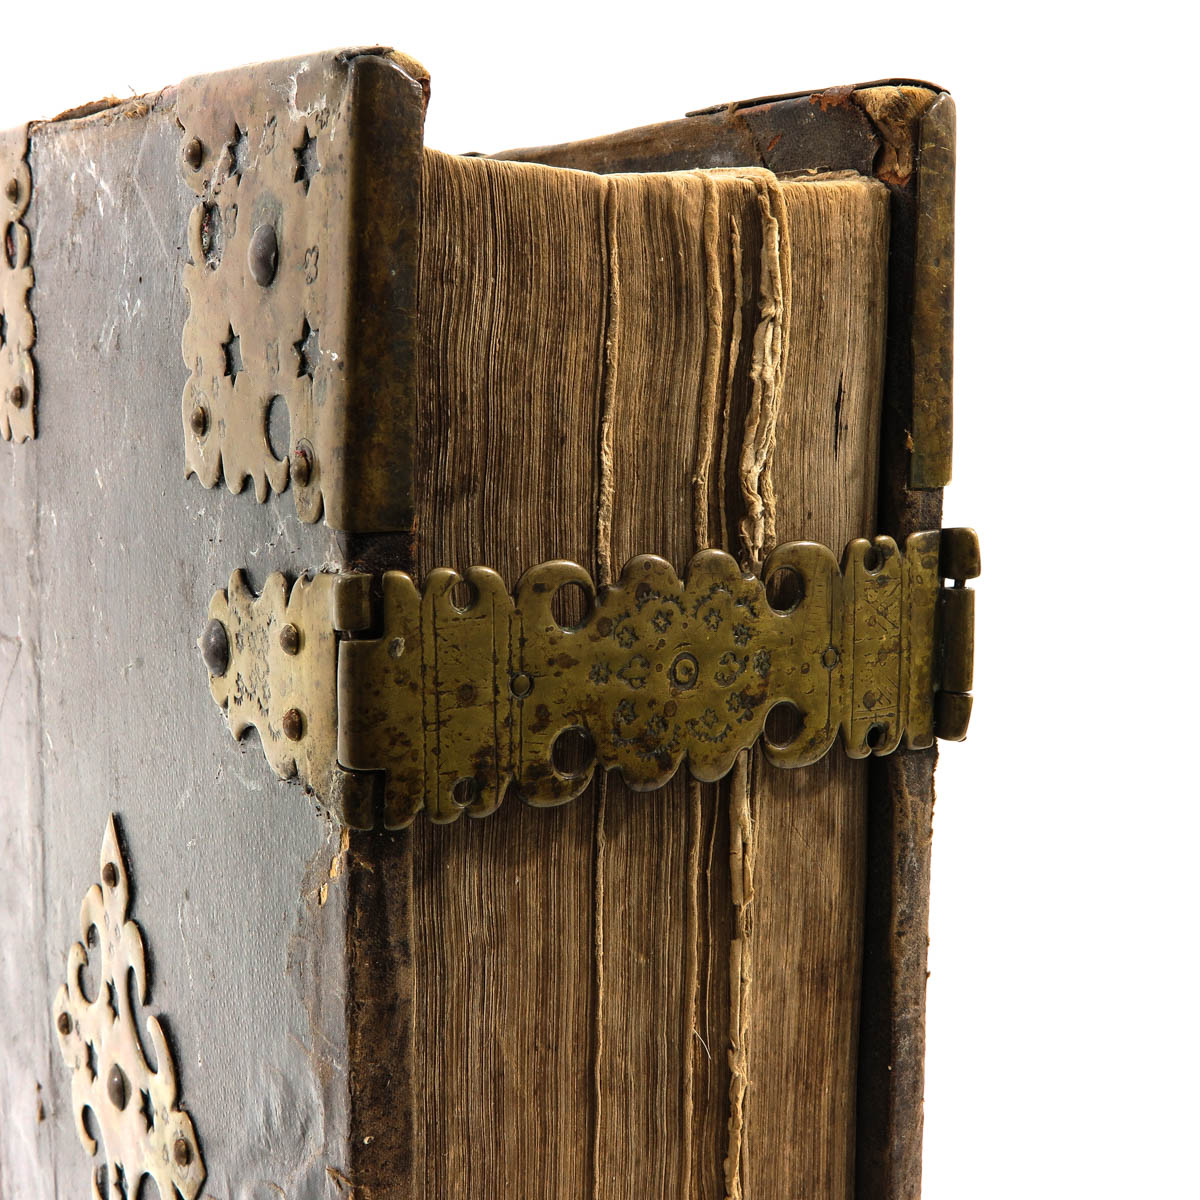 A 17th Century Dutch Bible - Image 5 of 8